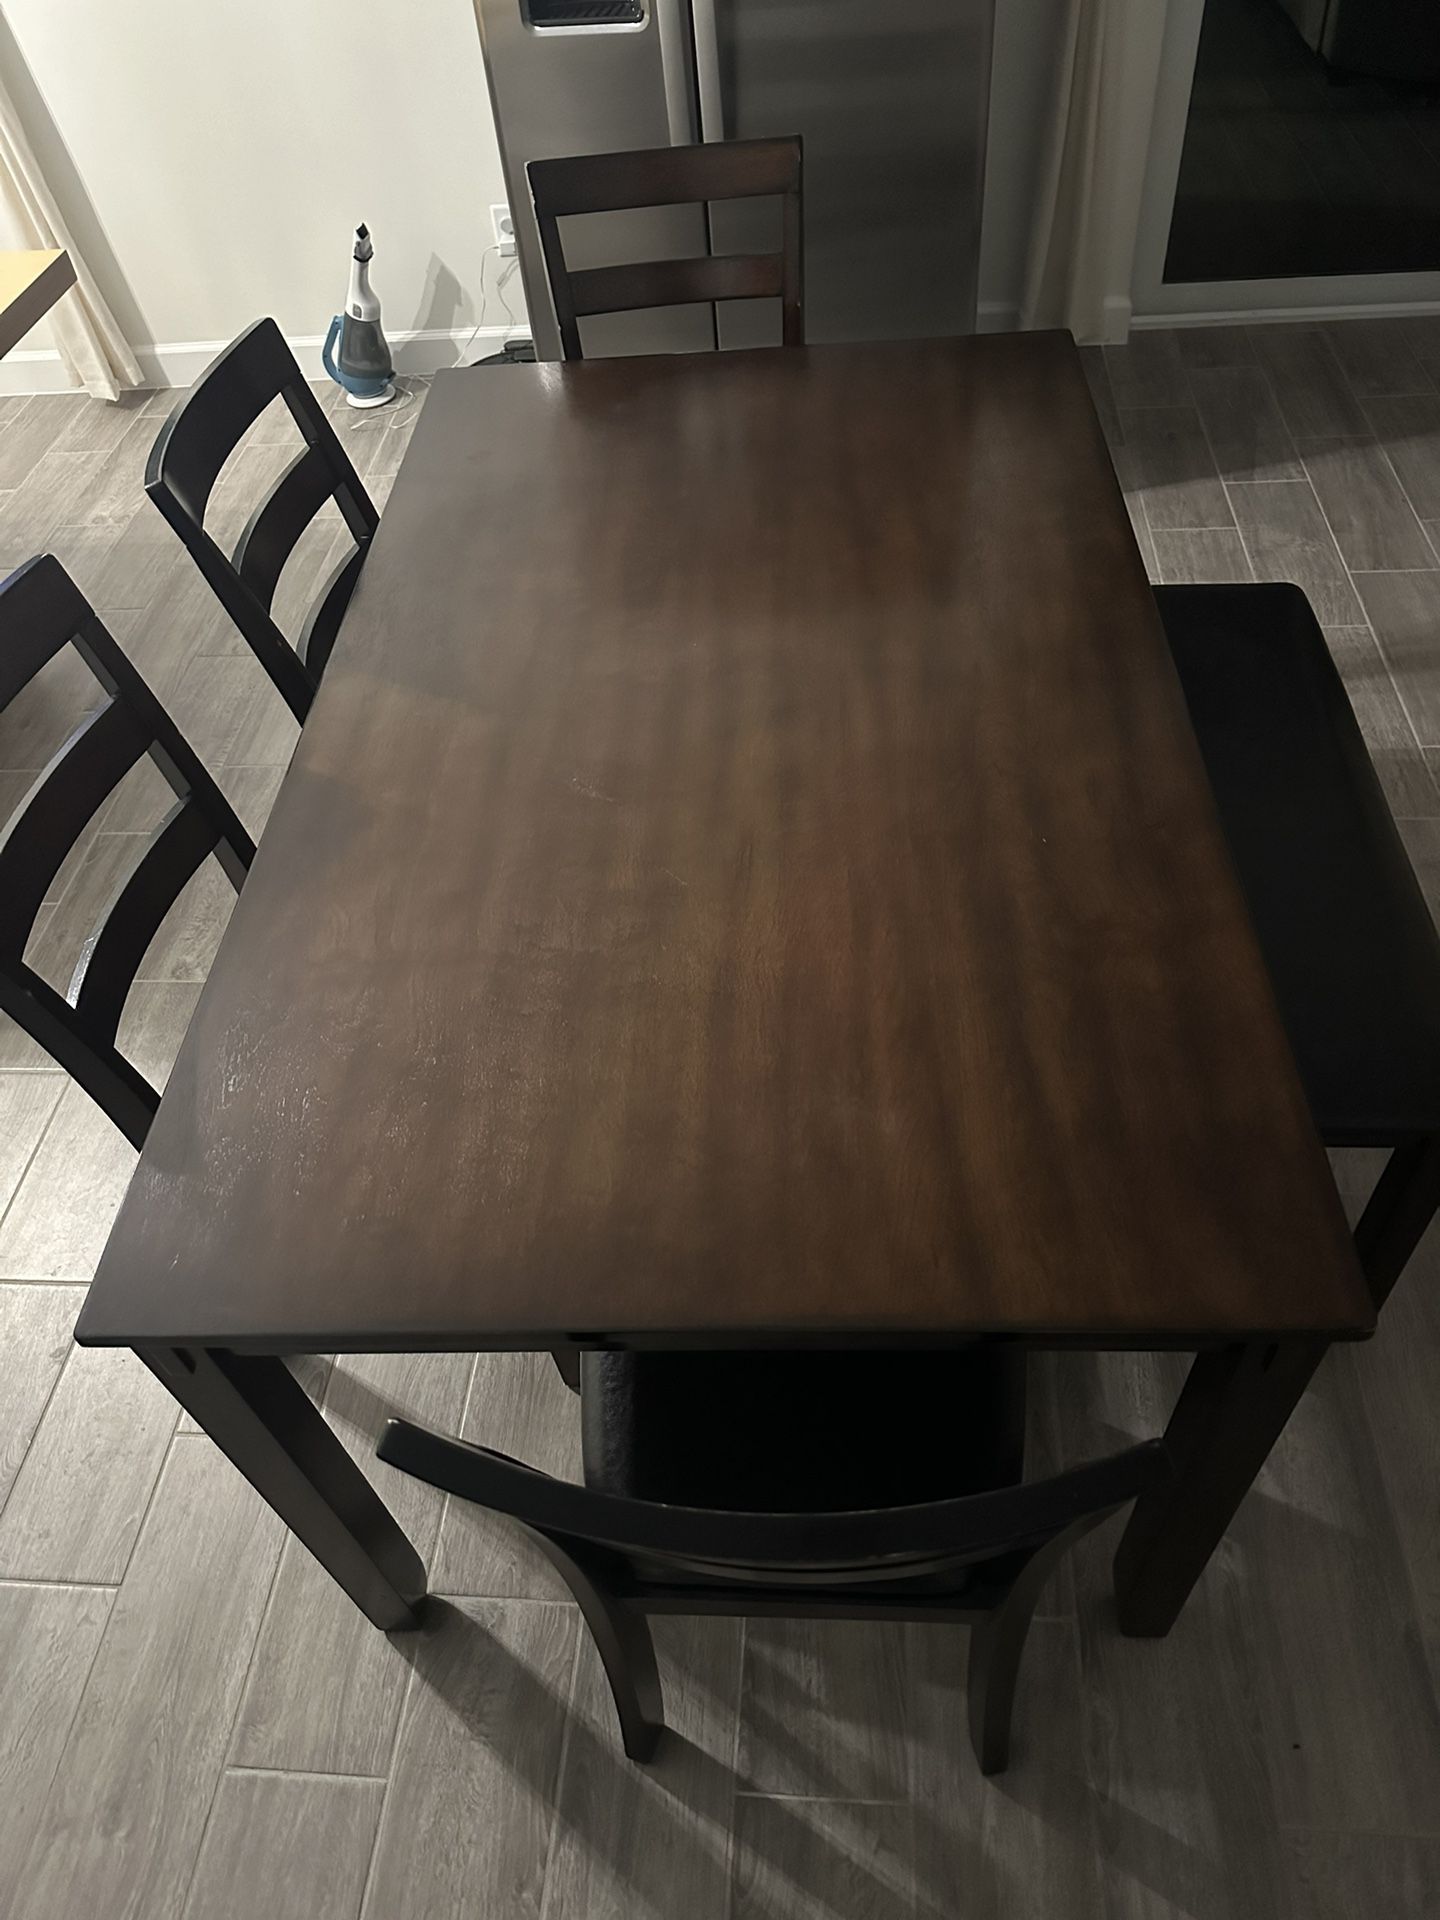 6 Seater With Bench Expresso Dining Room Table